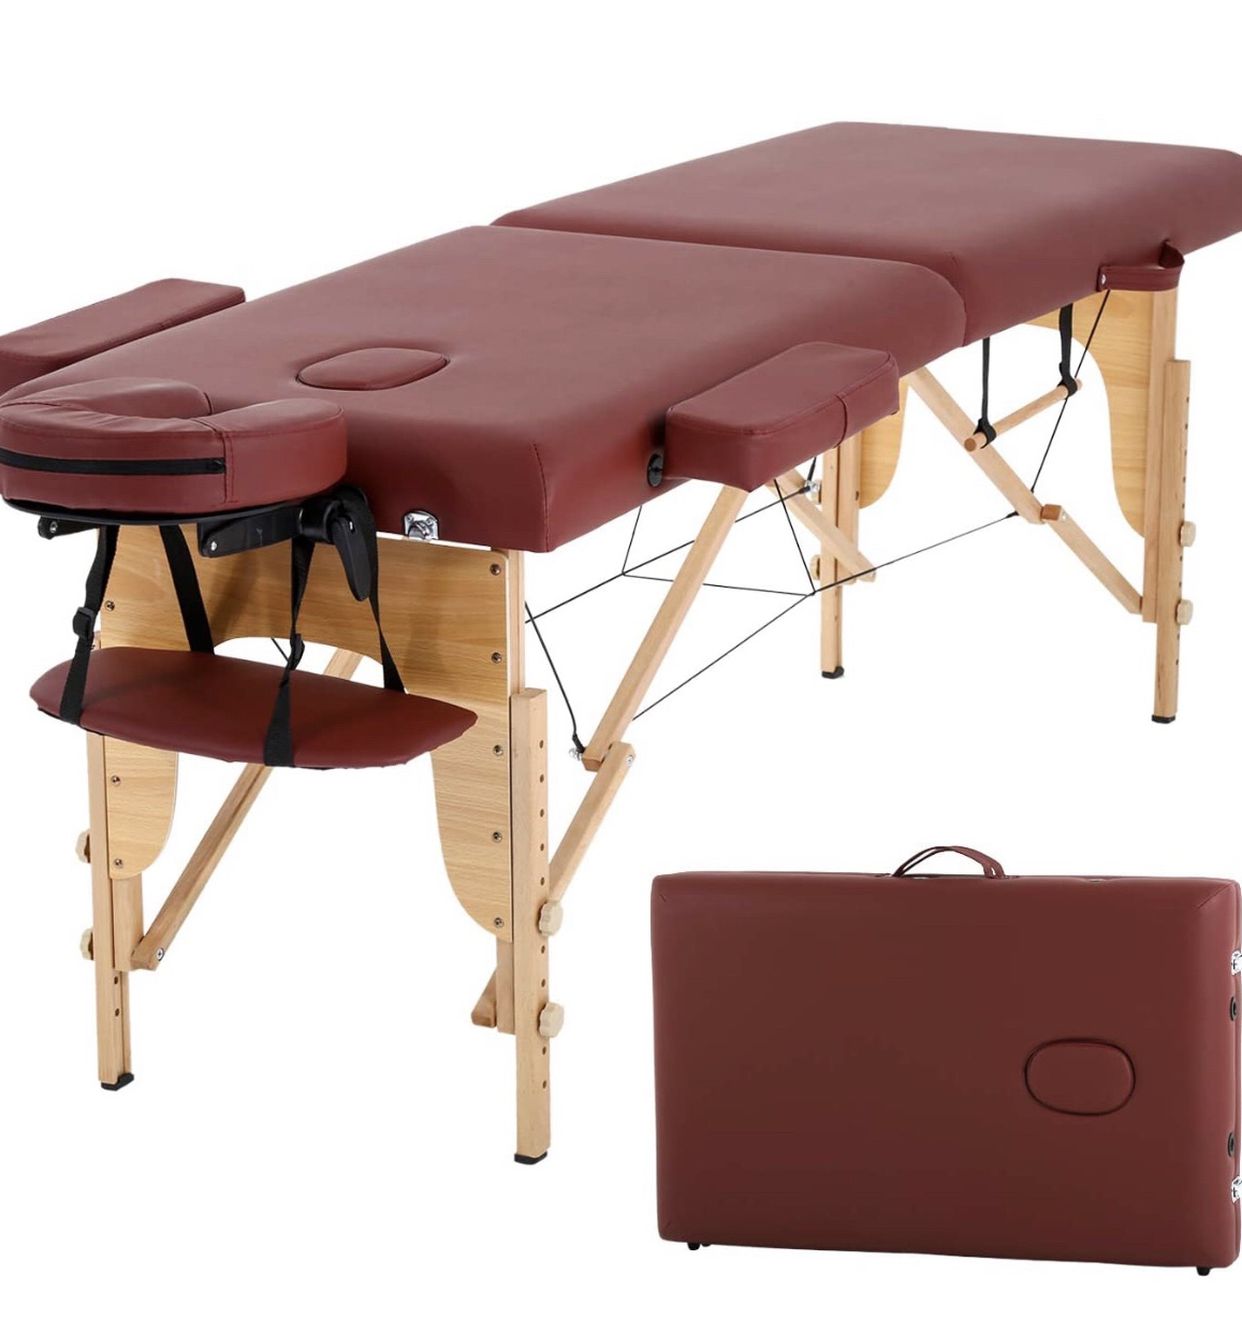 Brand New Portable Massage Table